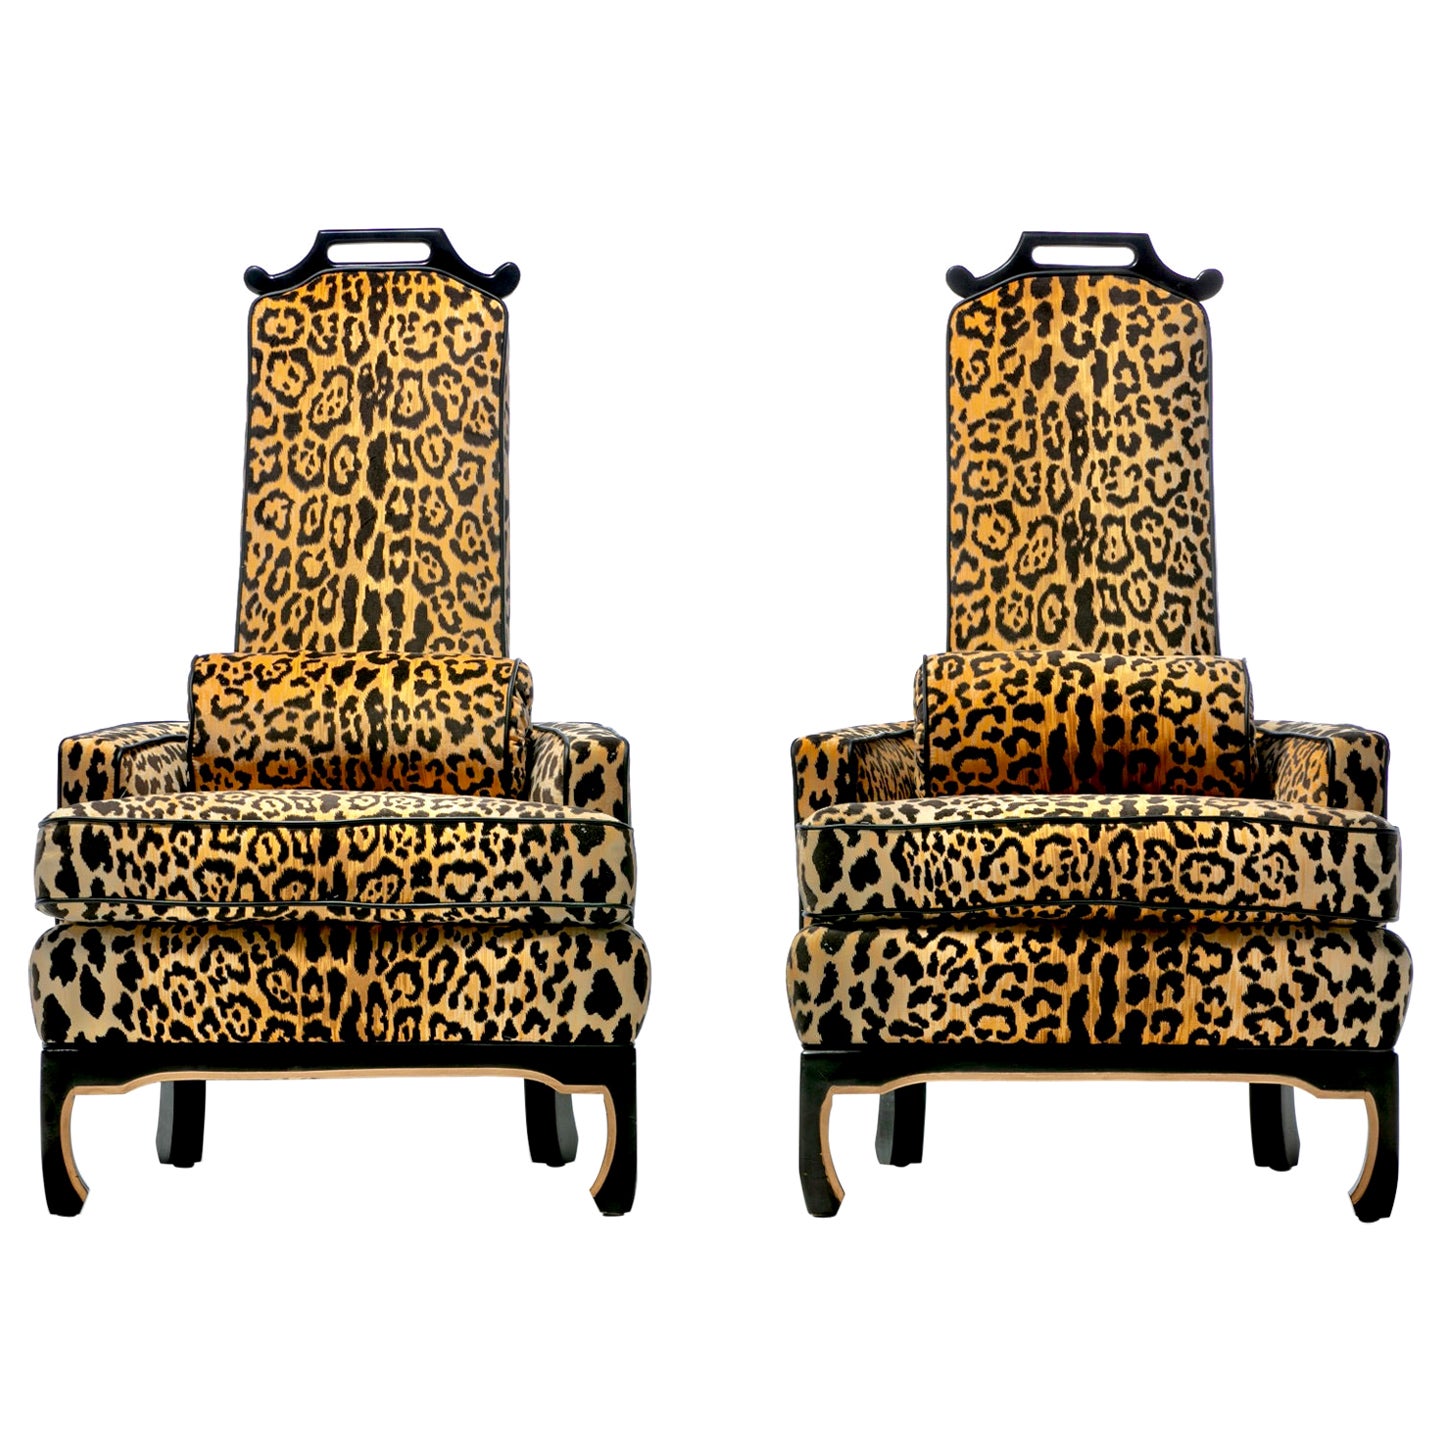 Pair of 1960s Hollywood Regency Chairs in Leopard Velvet & Black Leather Piping